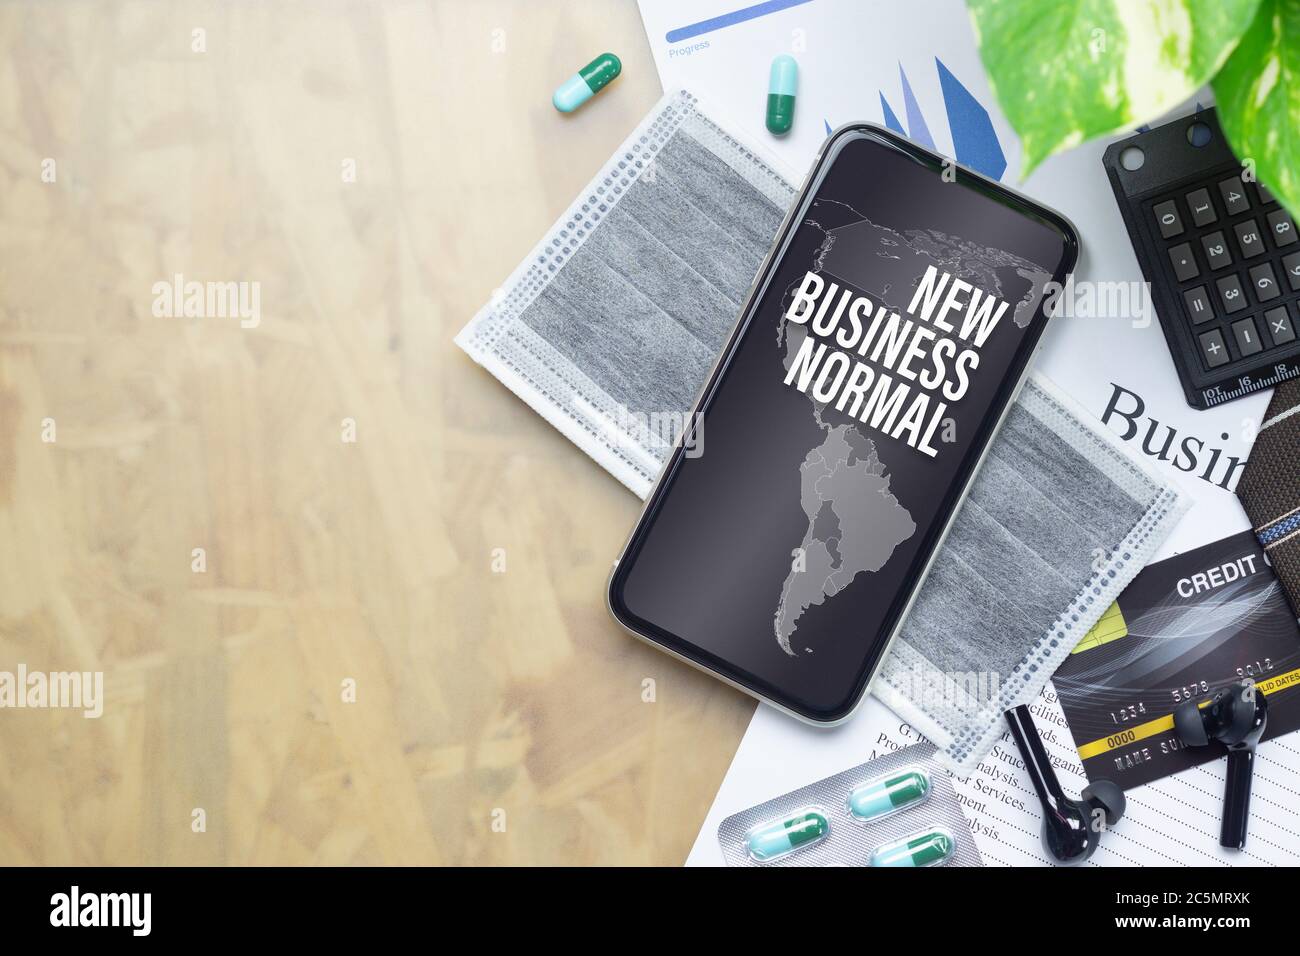 The Business New Normal After Covid-19 background concept. A smartphone with new business normal message with world map, medical face mask, medicine t Stock Photo